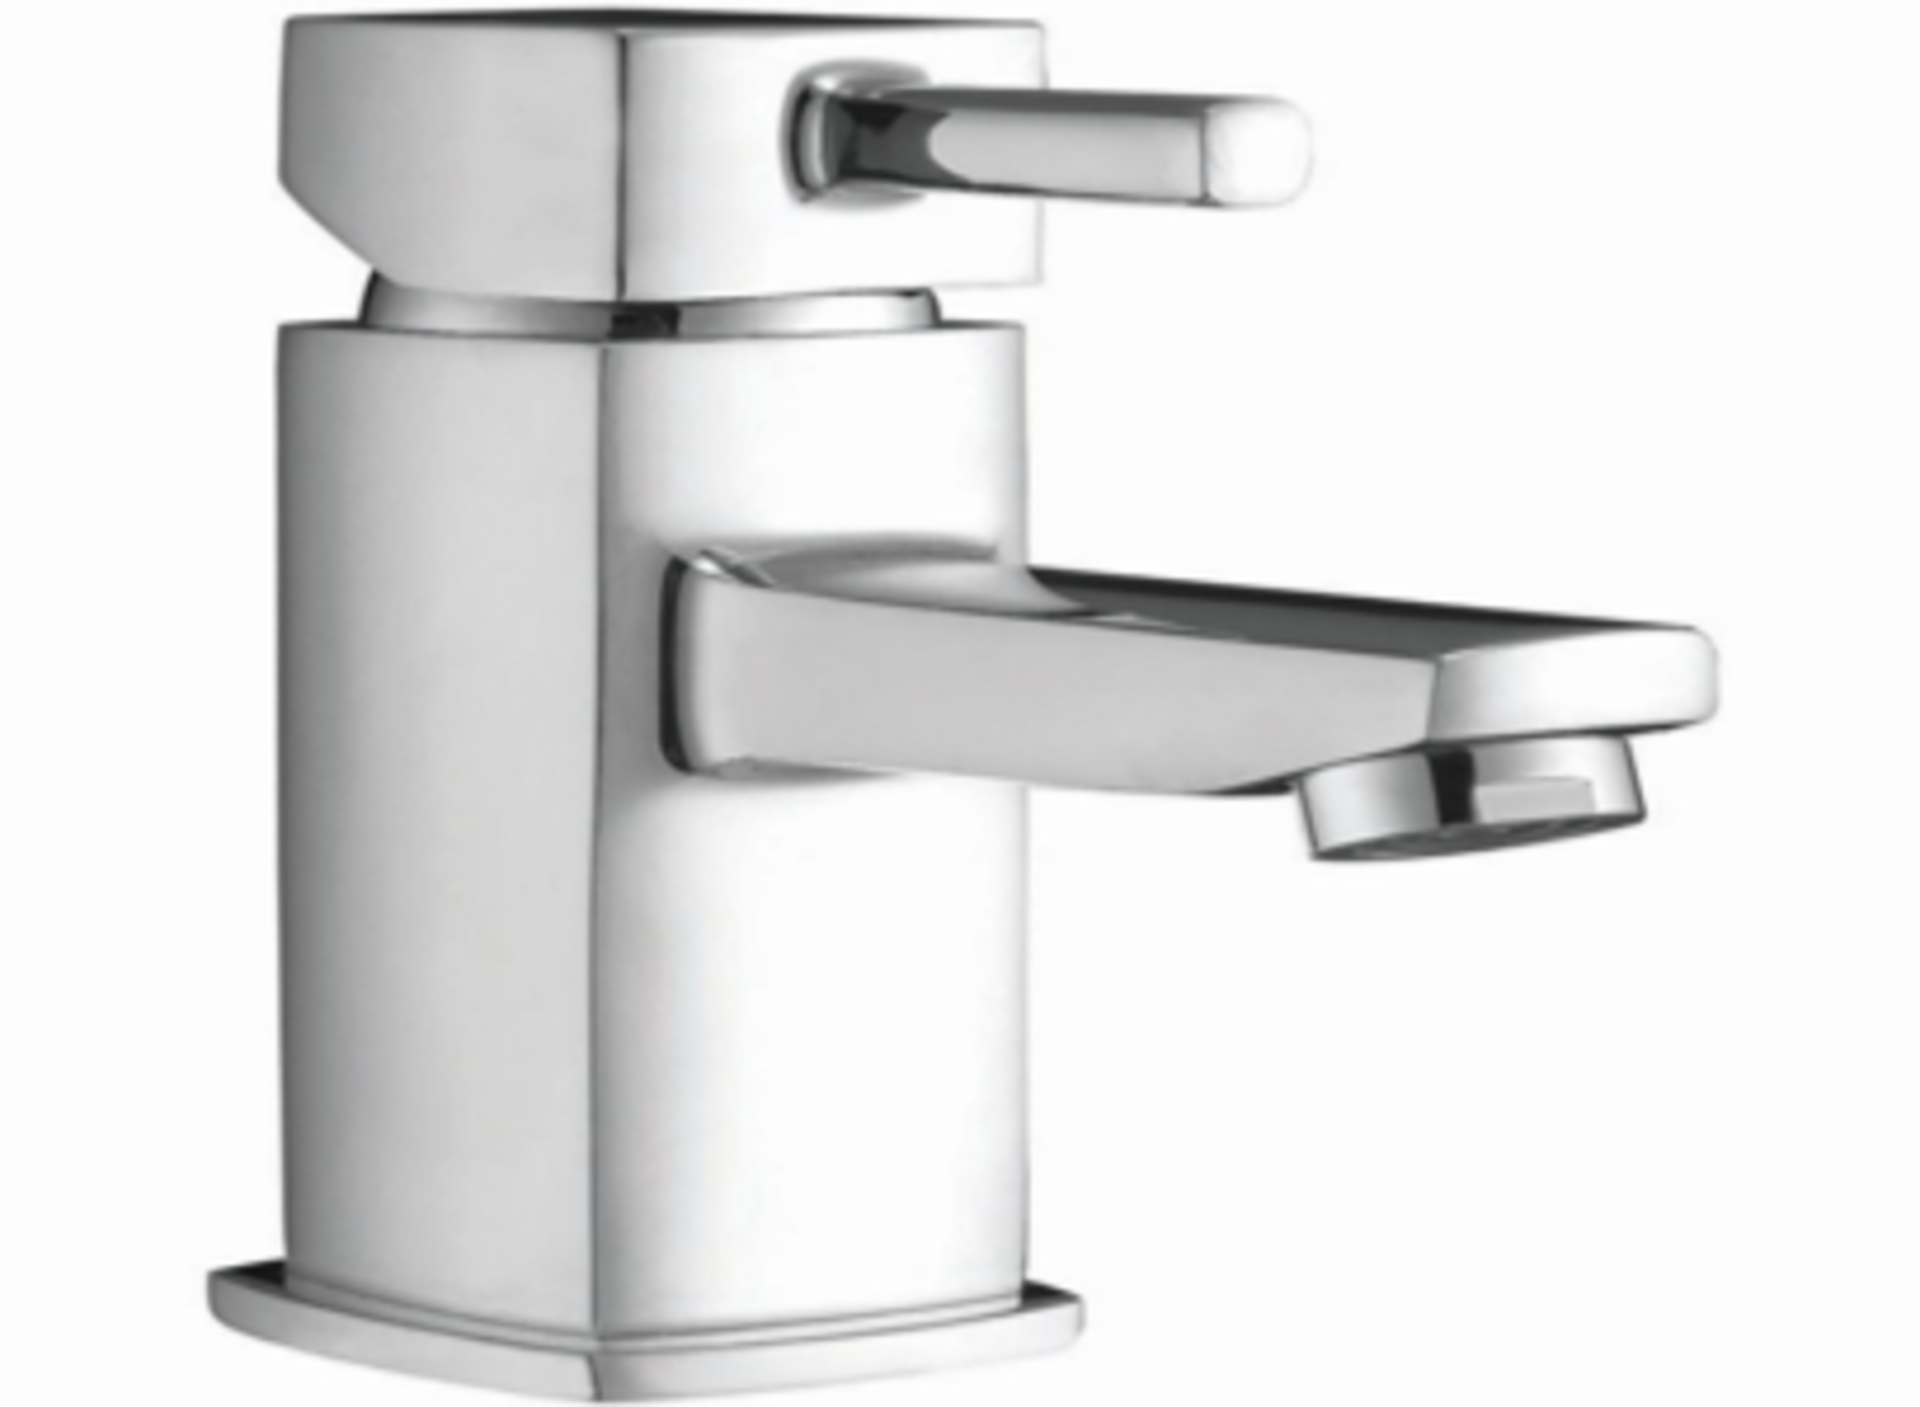 Emperor Mono Mixer Tap With Push Waste - Chrome - New & Boxed.